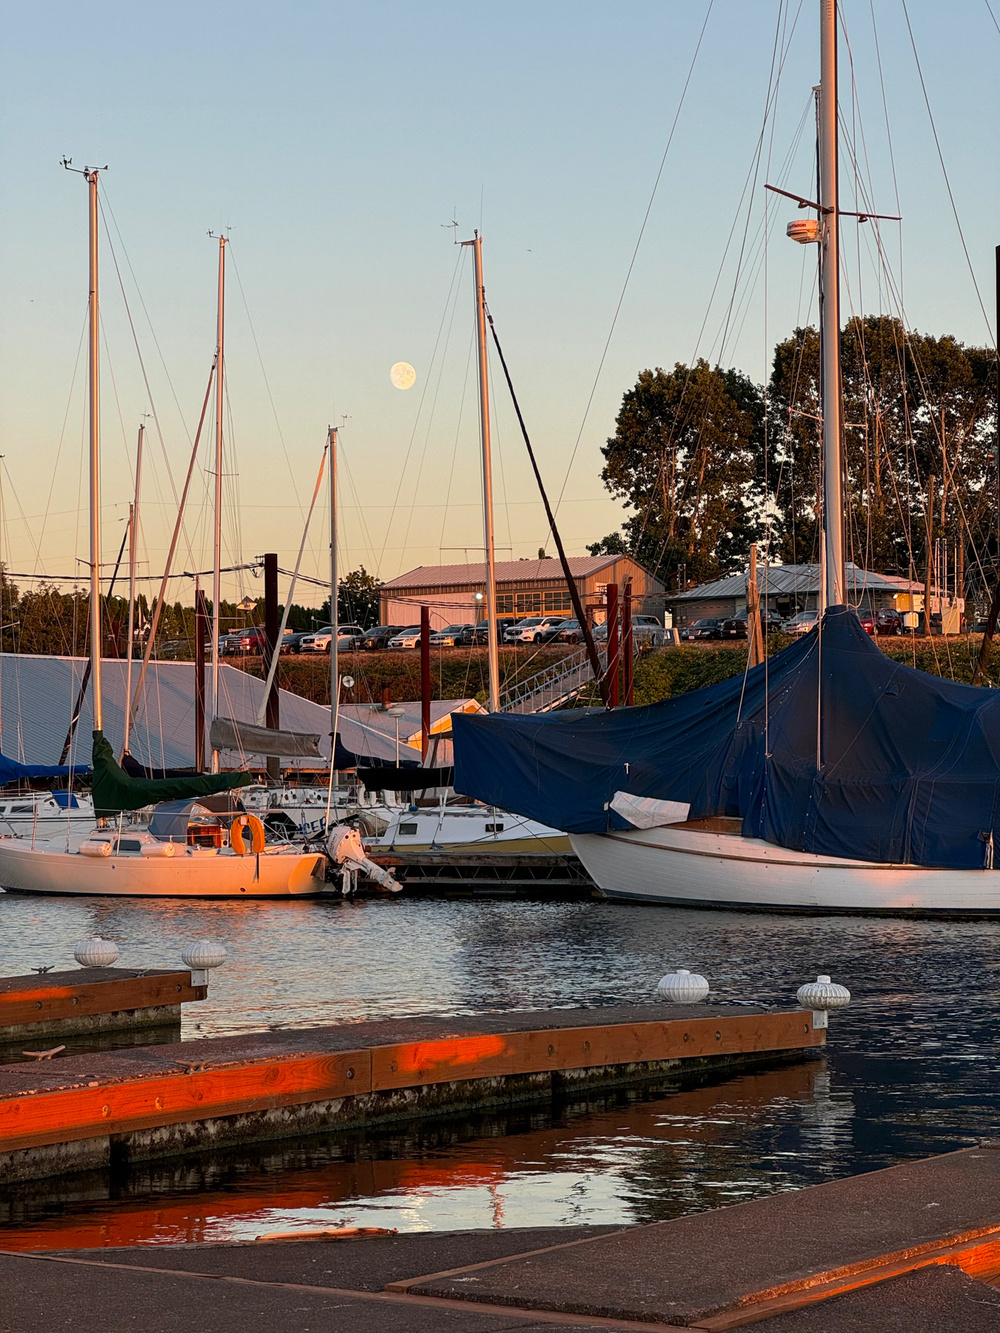 This image shows a serene marina during sunset, with sailboats and their masts prominently featured. The boats are docked, some covered with tarps. A nearly full moon is visible in the sky. Trees and a building in the background complete the picturesque scene.